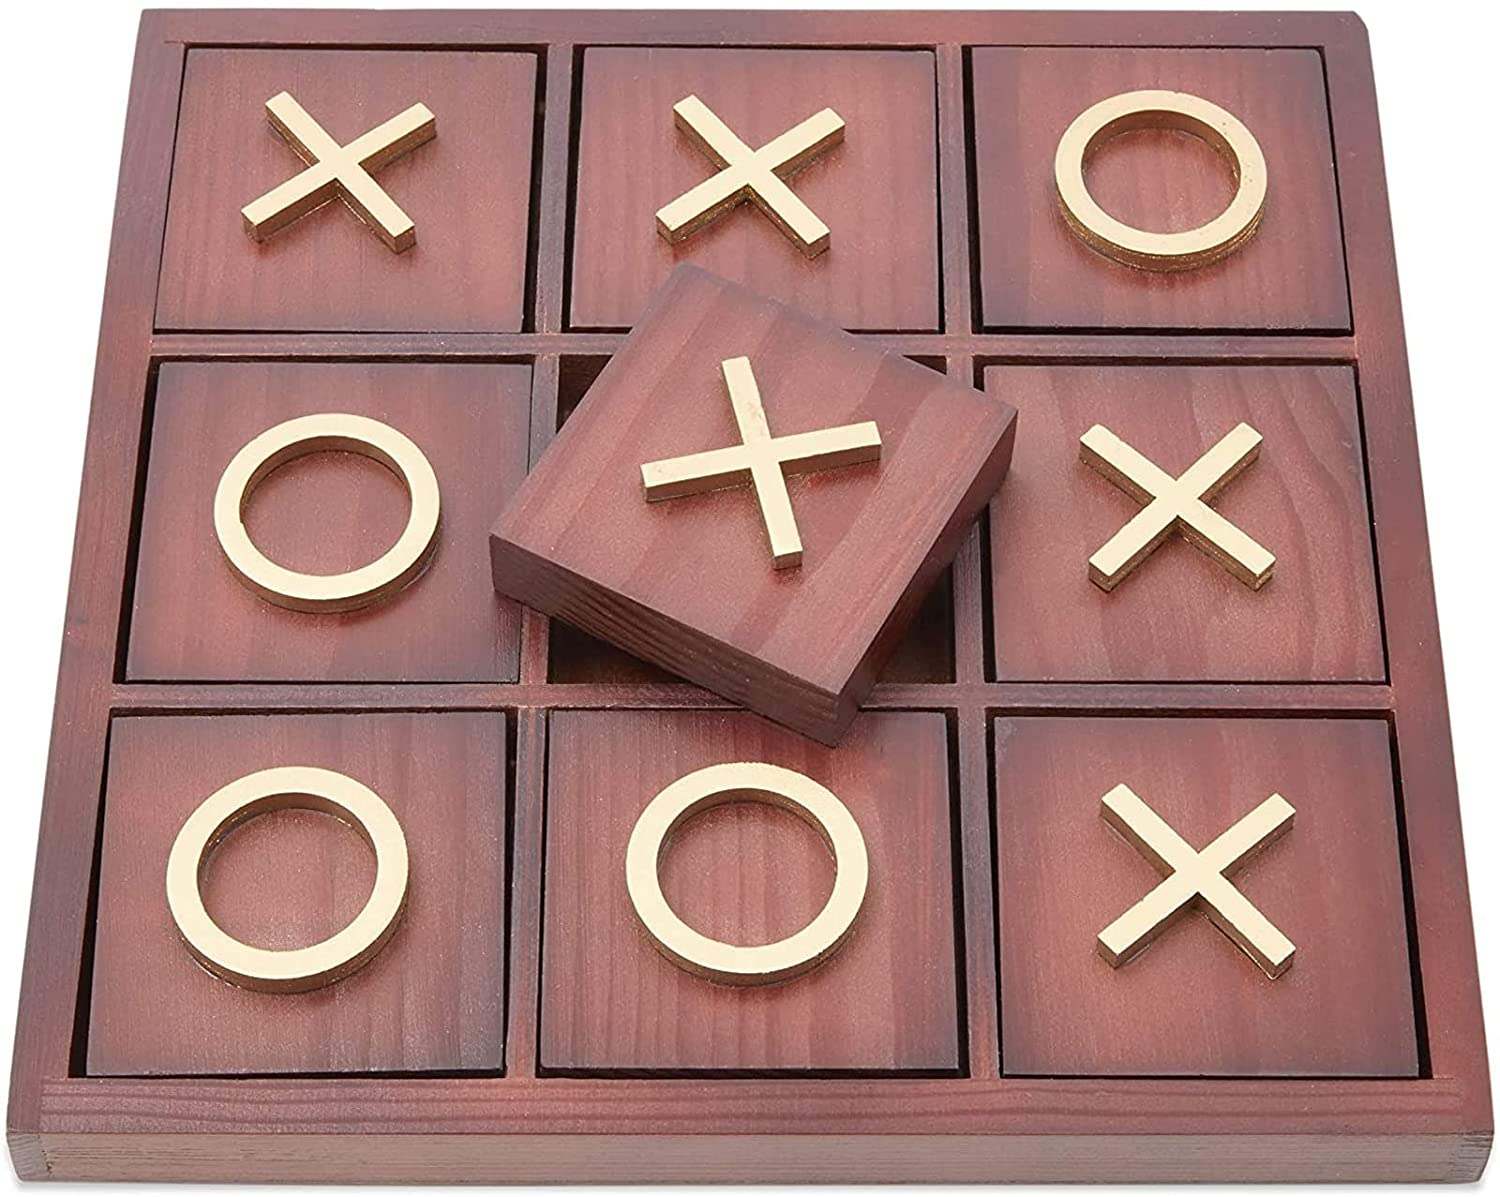 Wooden Tic Tac Toe Coffee Table Game 9.5 x 9.5 in, 10 Pieces 